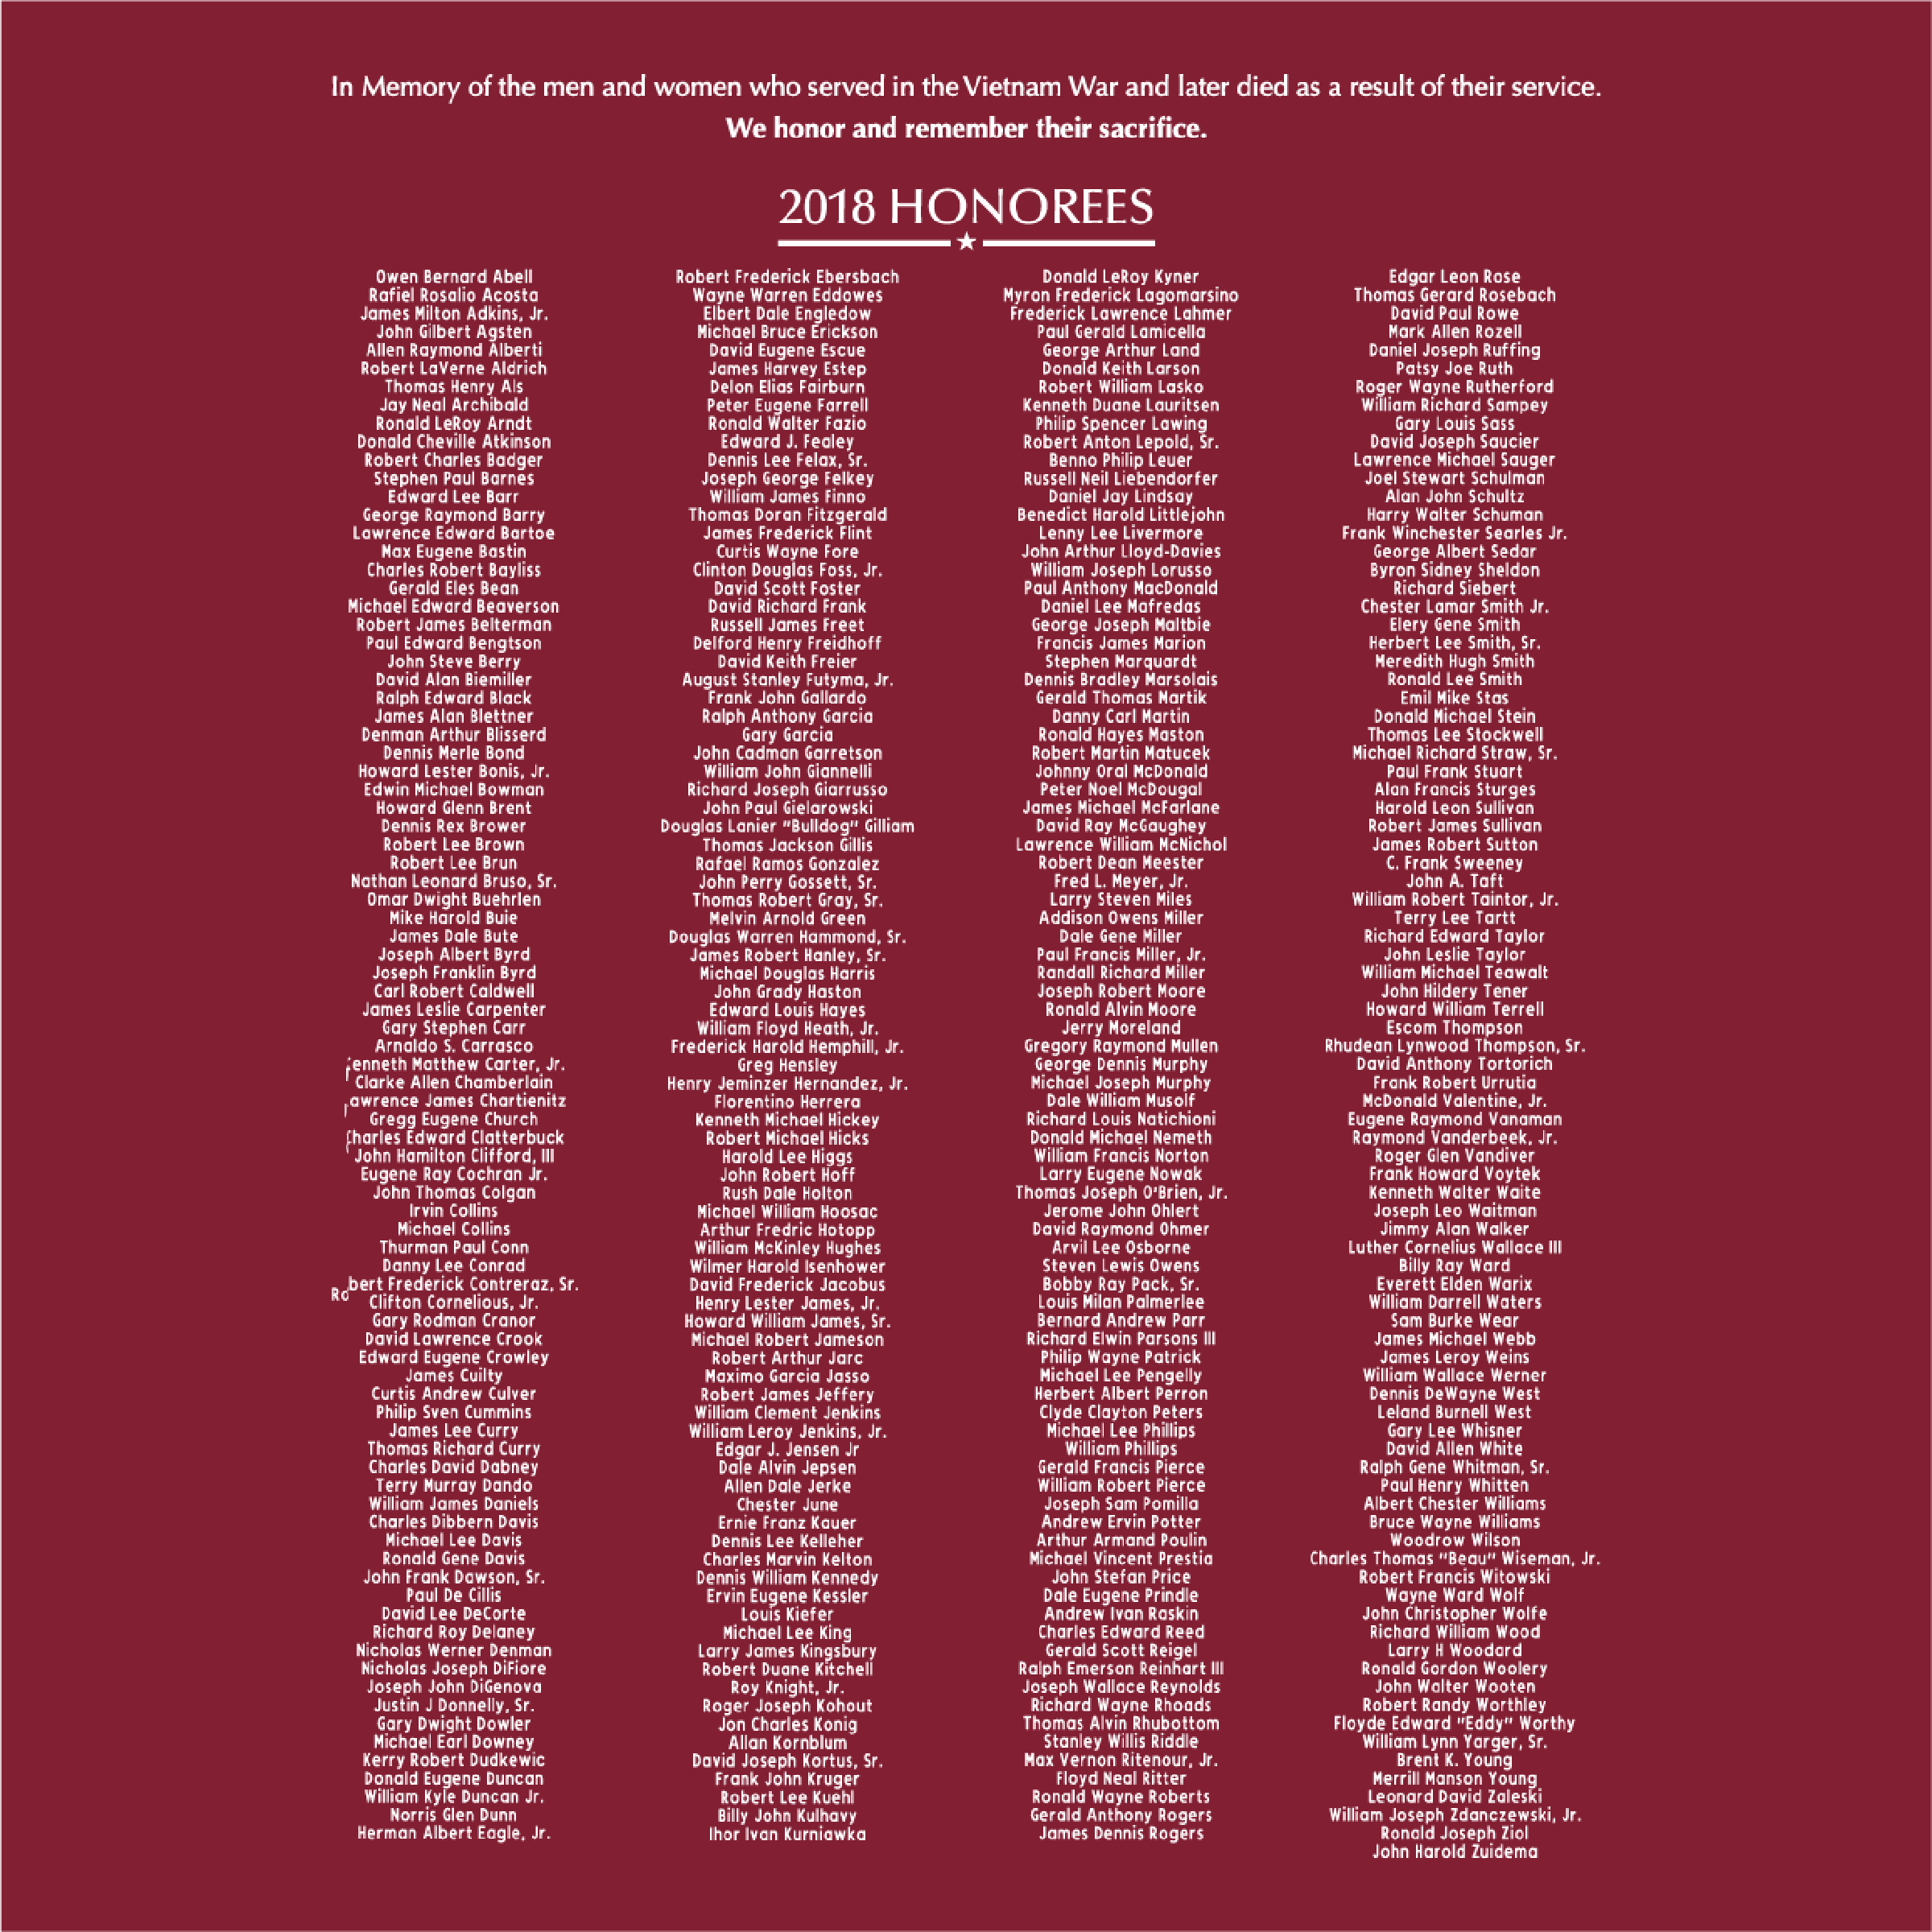 2018 In Memory Honorees shirt design - zoomed